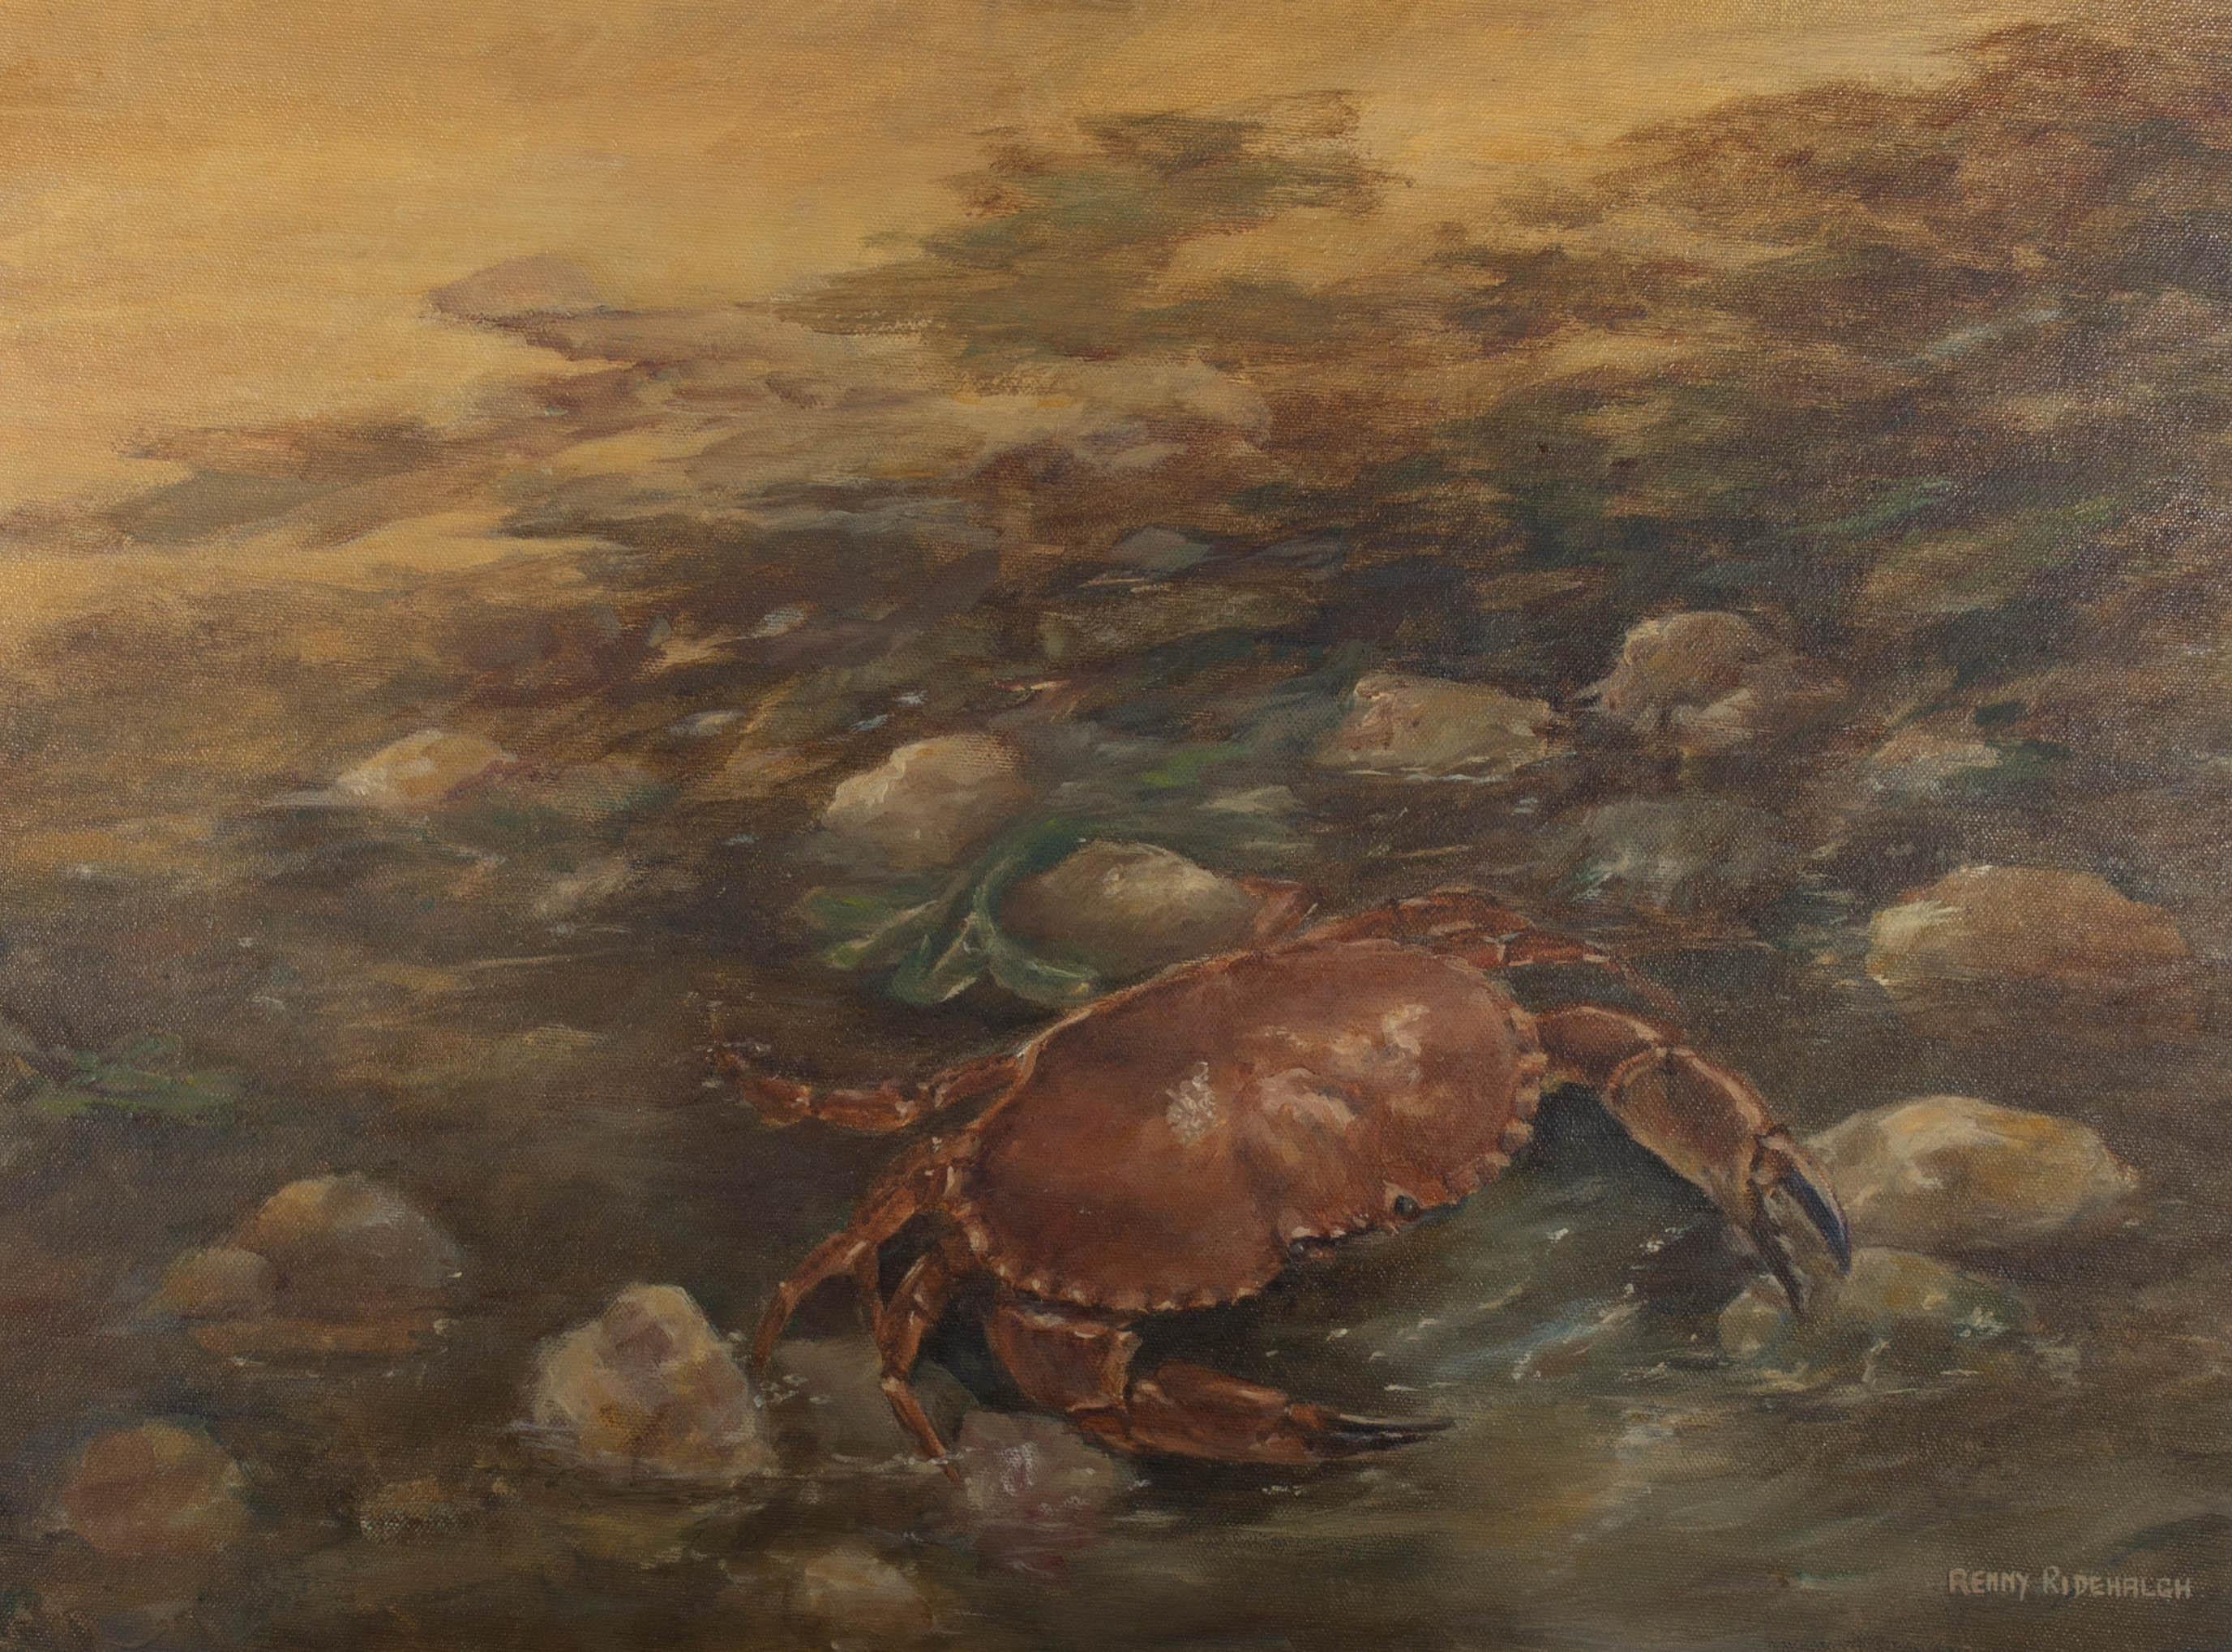 A painting of a characterful crustacean heading down to the sea. Presented in a wooden frame with a gilt-effect outer edge. Signed to the lower-right edge. Artist's label on the verso. On board.
